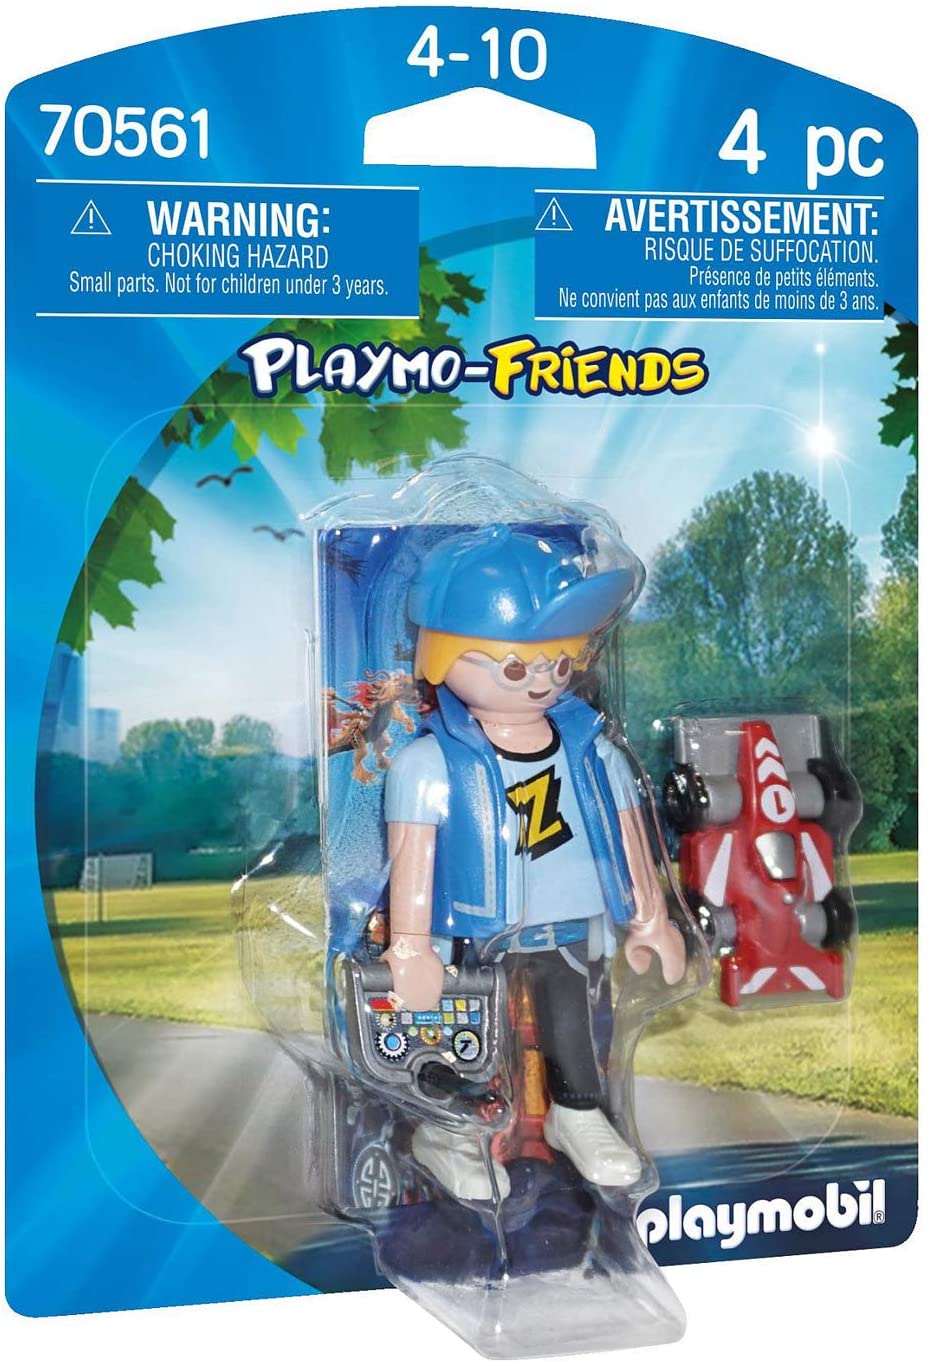 Playmobil 70561 Playmo Friends Boy with Rc Car for Children Ages 4+